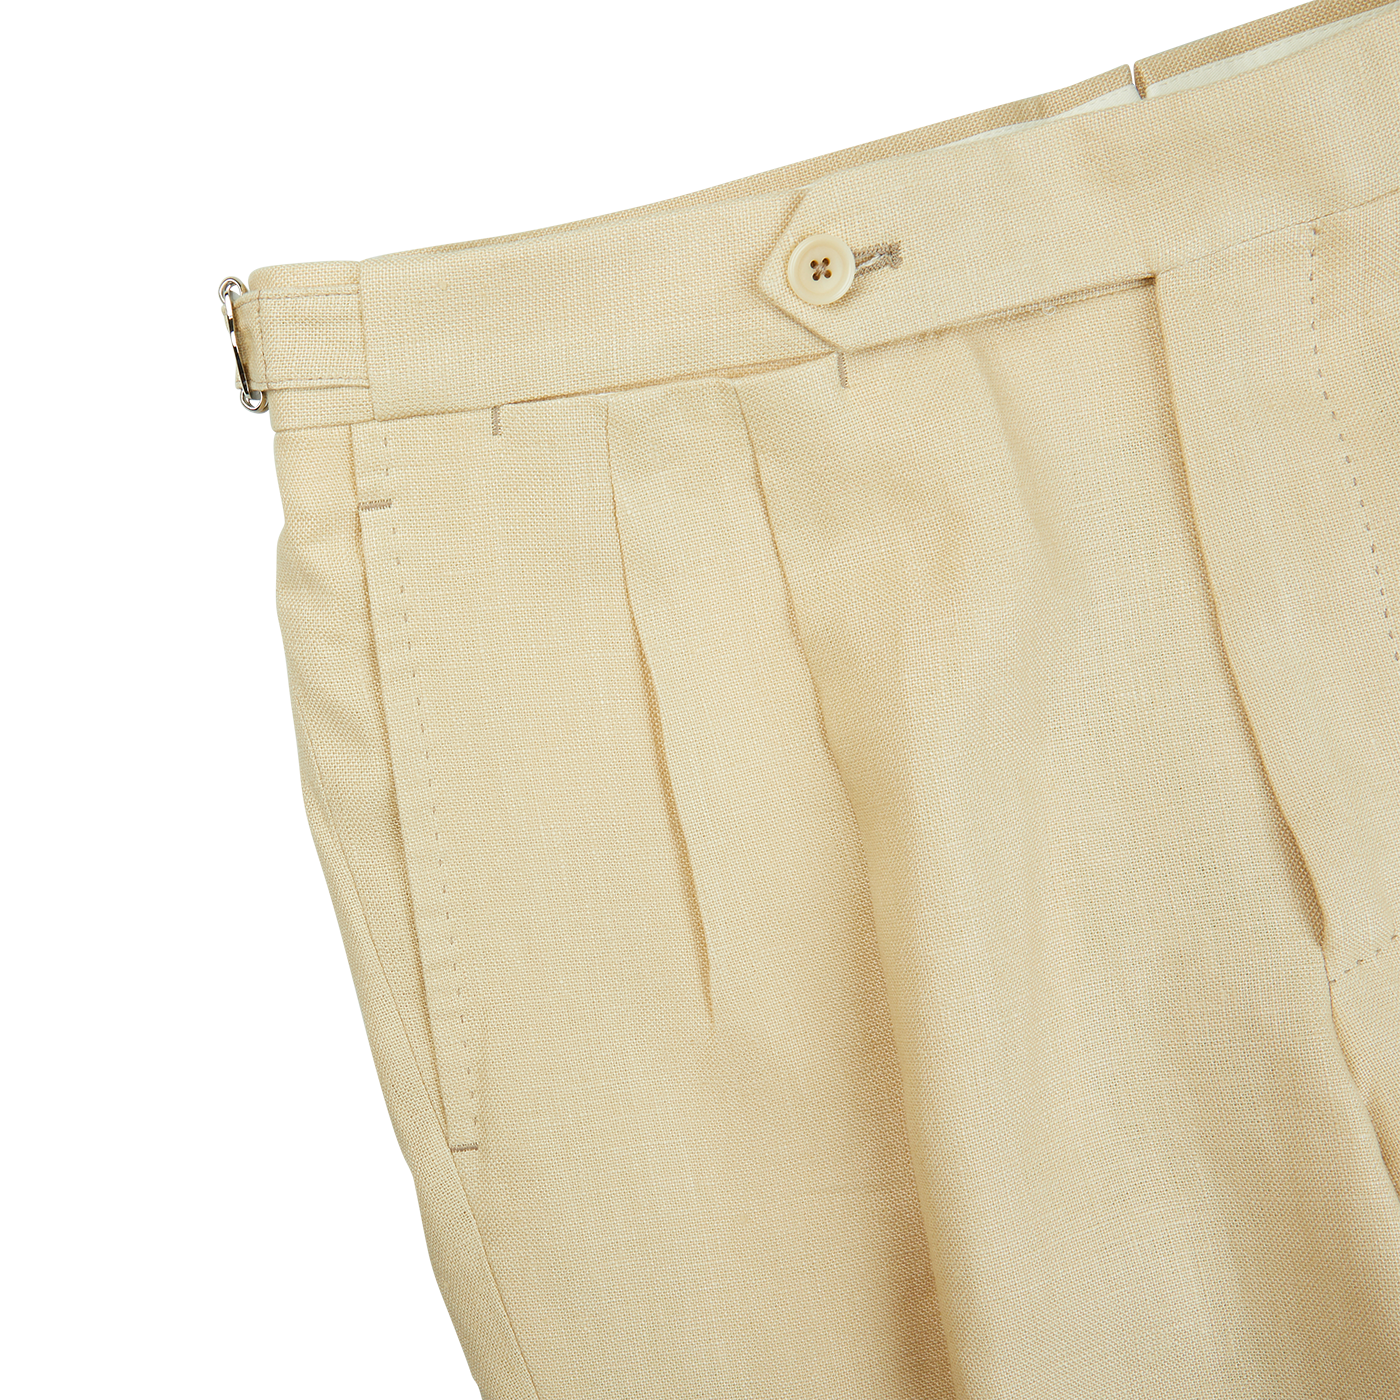 A pair of Caramel Beige Irish Linen Modello B trousers with buttons on the side from De Petrillo.